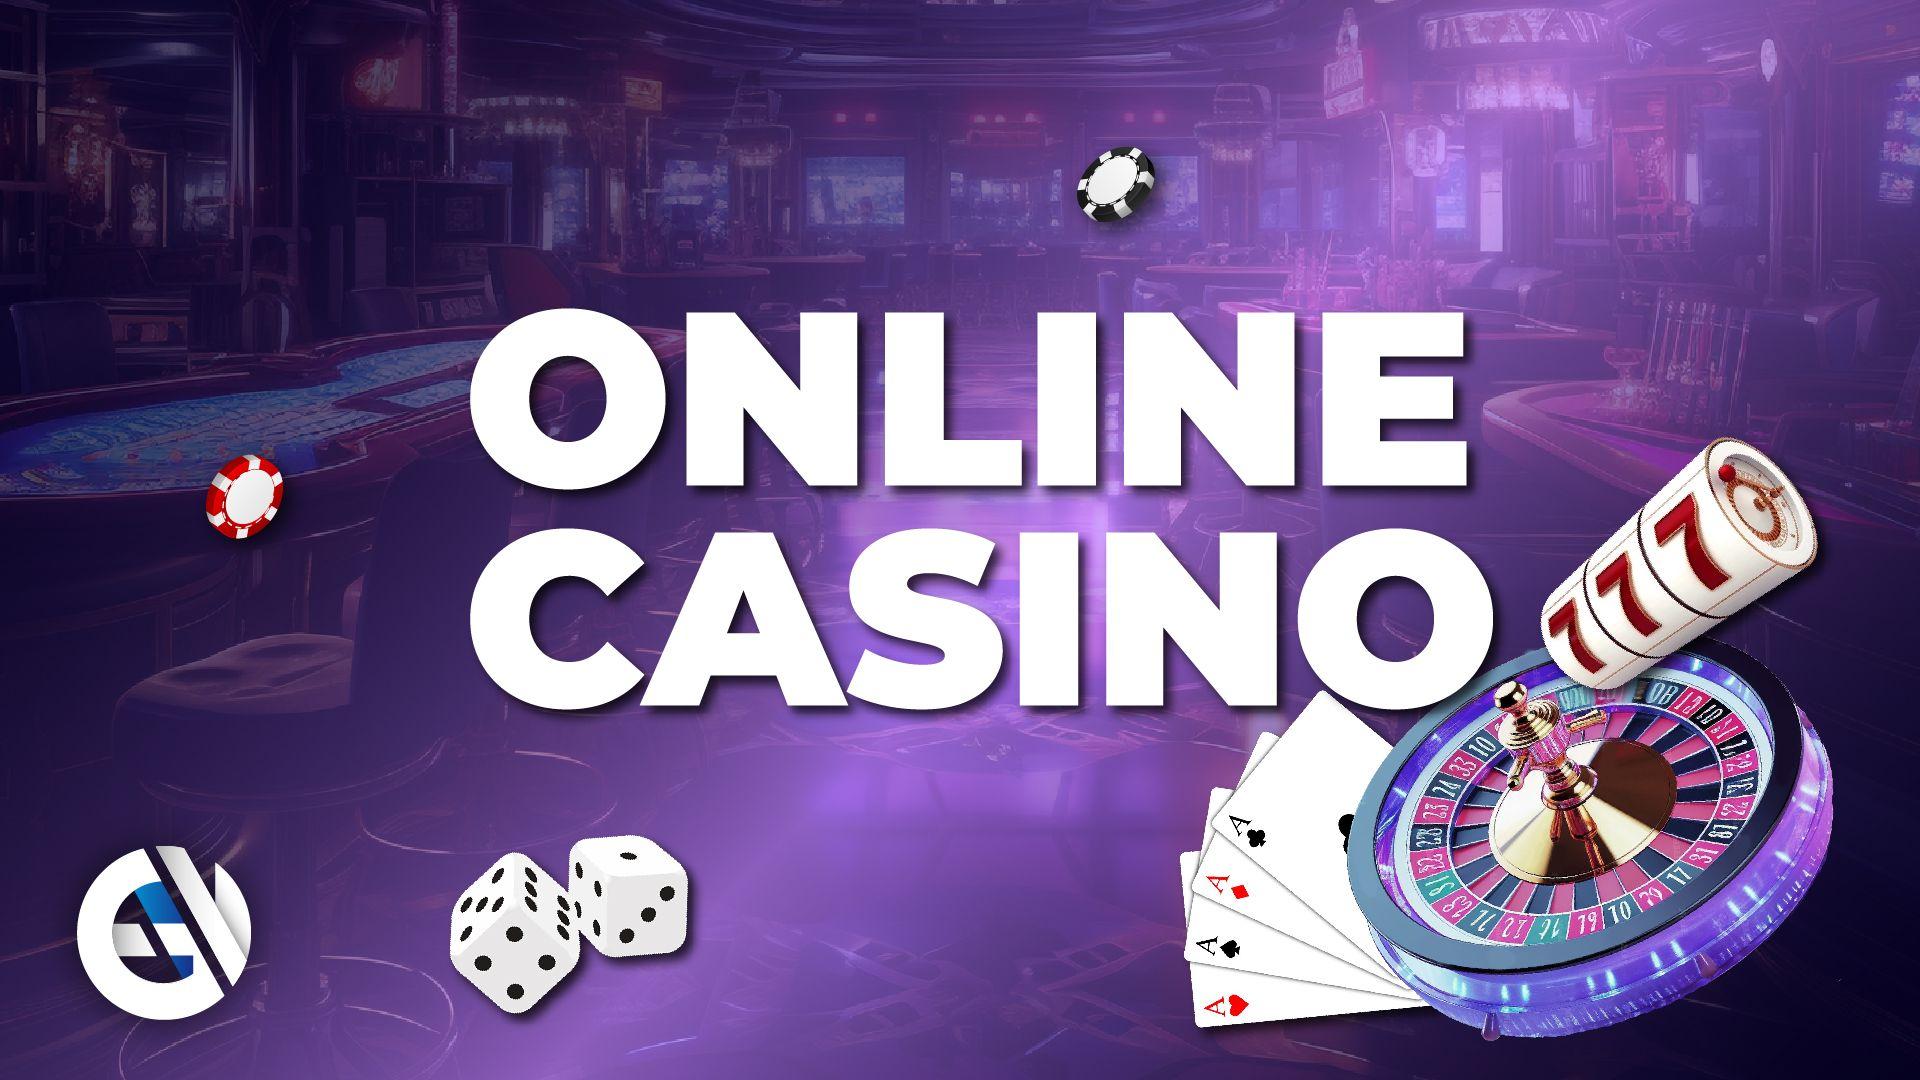 Ethical principles in online casino behaviour are "unspoken rules"